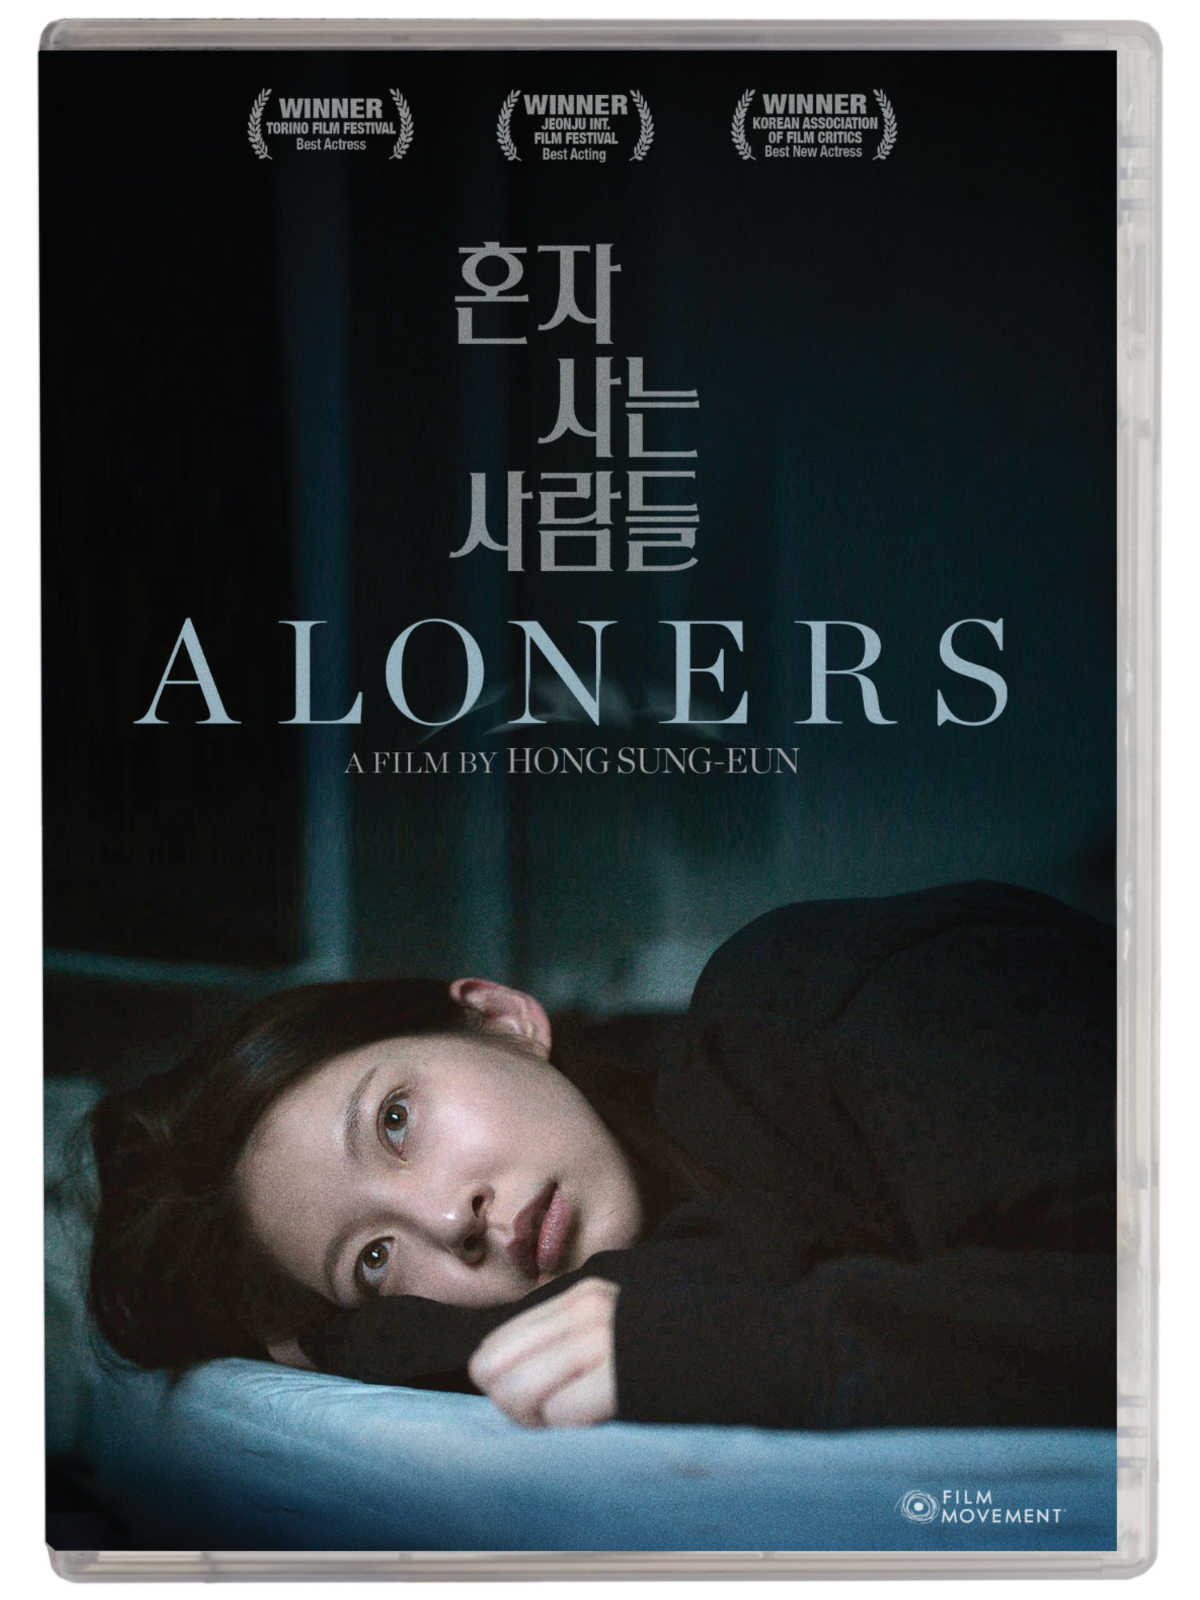 Aloners is a 2021 Korean film that explores the themes of social isolation, loneliness, and alienation in modern society.